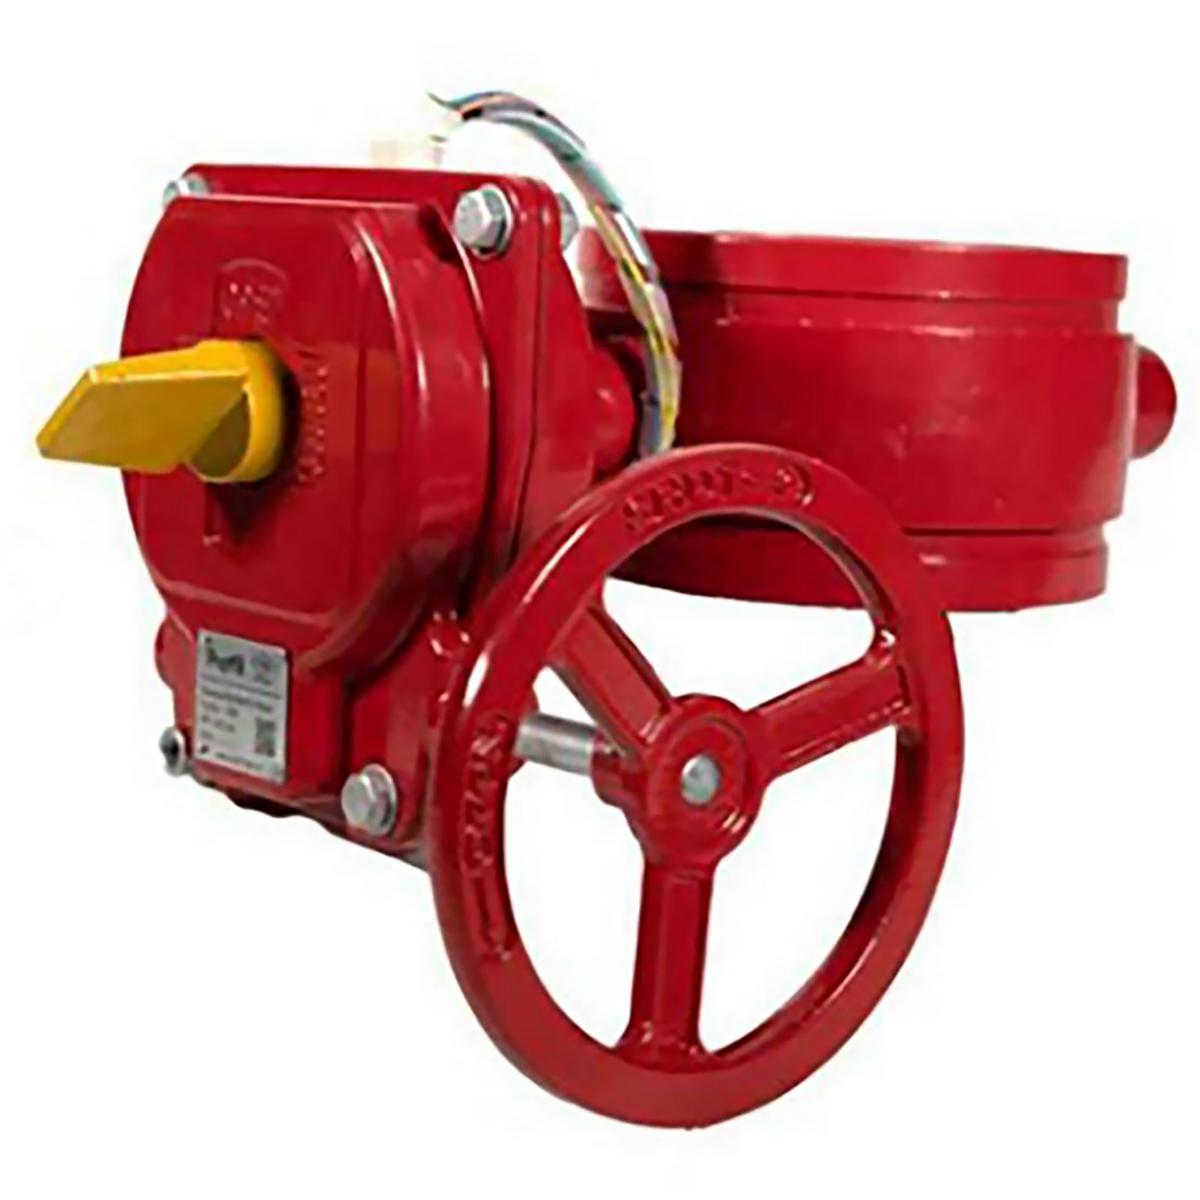 Hose Reel Stands-Galvanised & Powder Coated - Fire Hydrant Risers